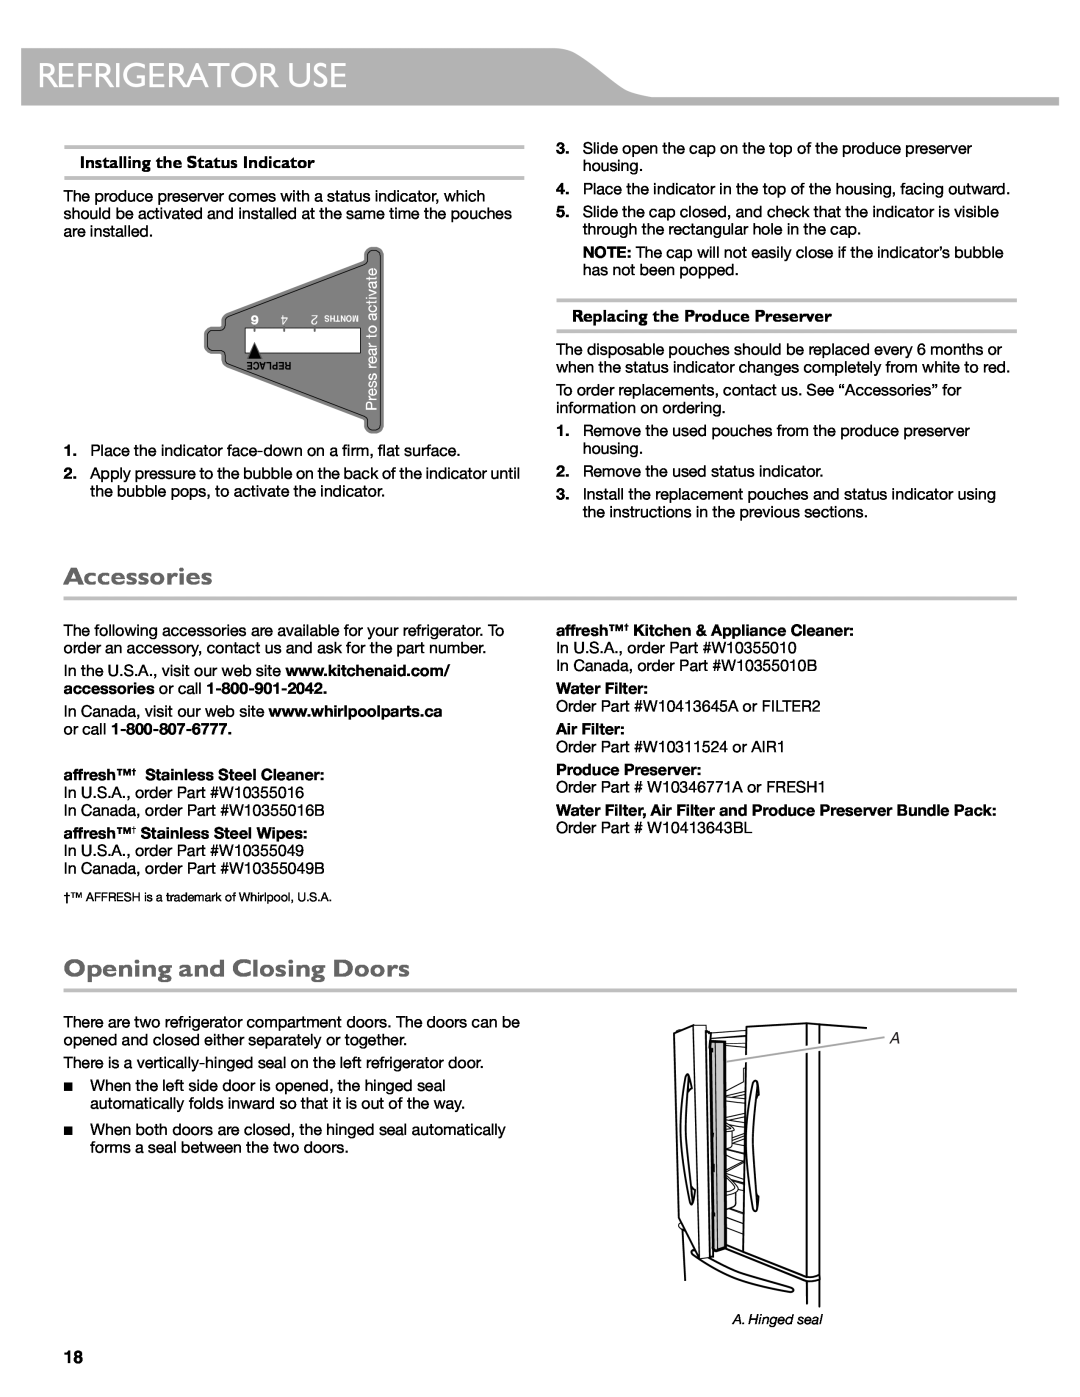 KitchenAid W10417002A manual Refrigerator Use, Accessories, Opening and Closing Doors, Installing the Status Indicator 